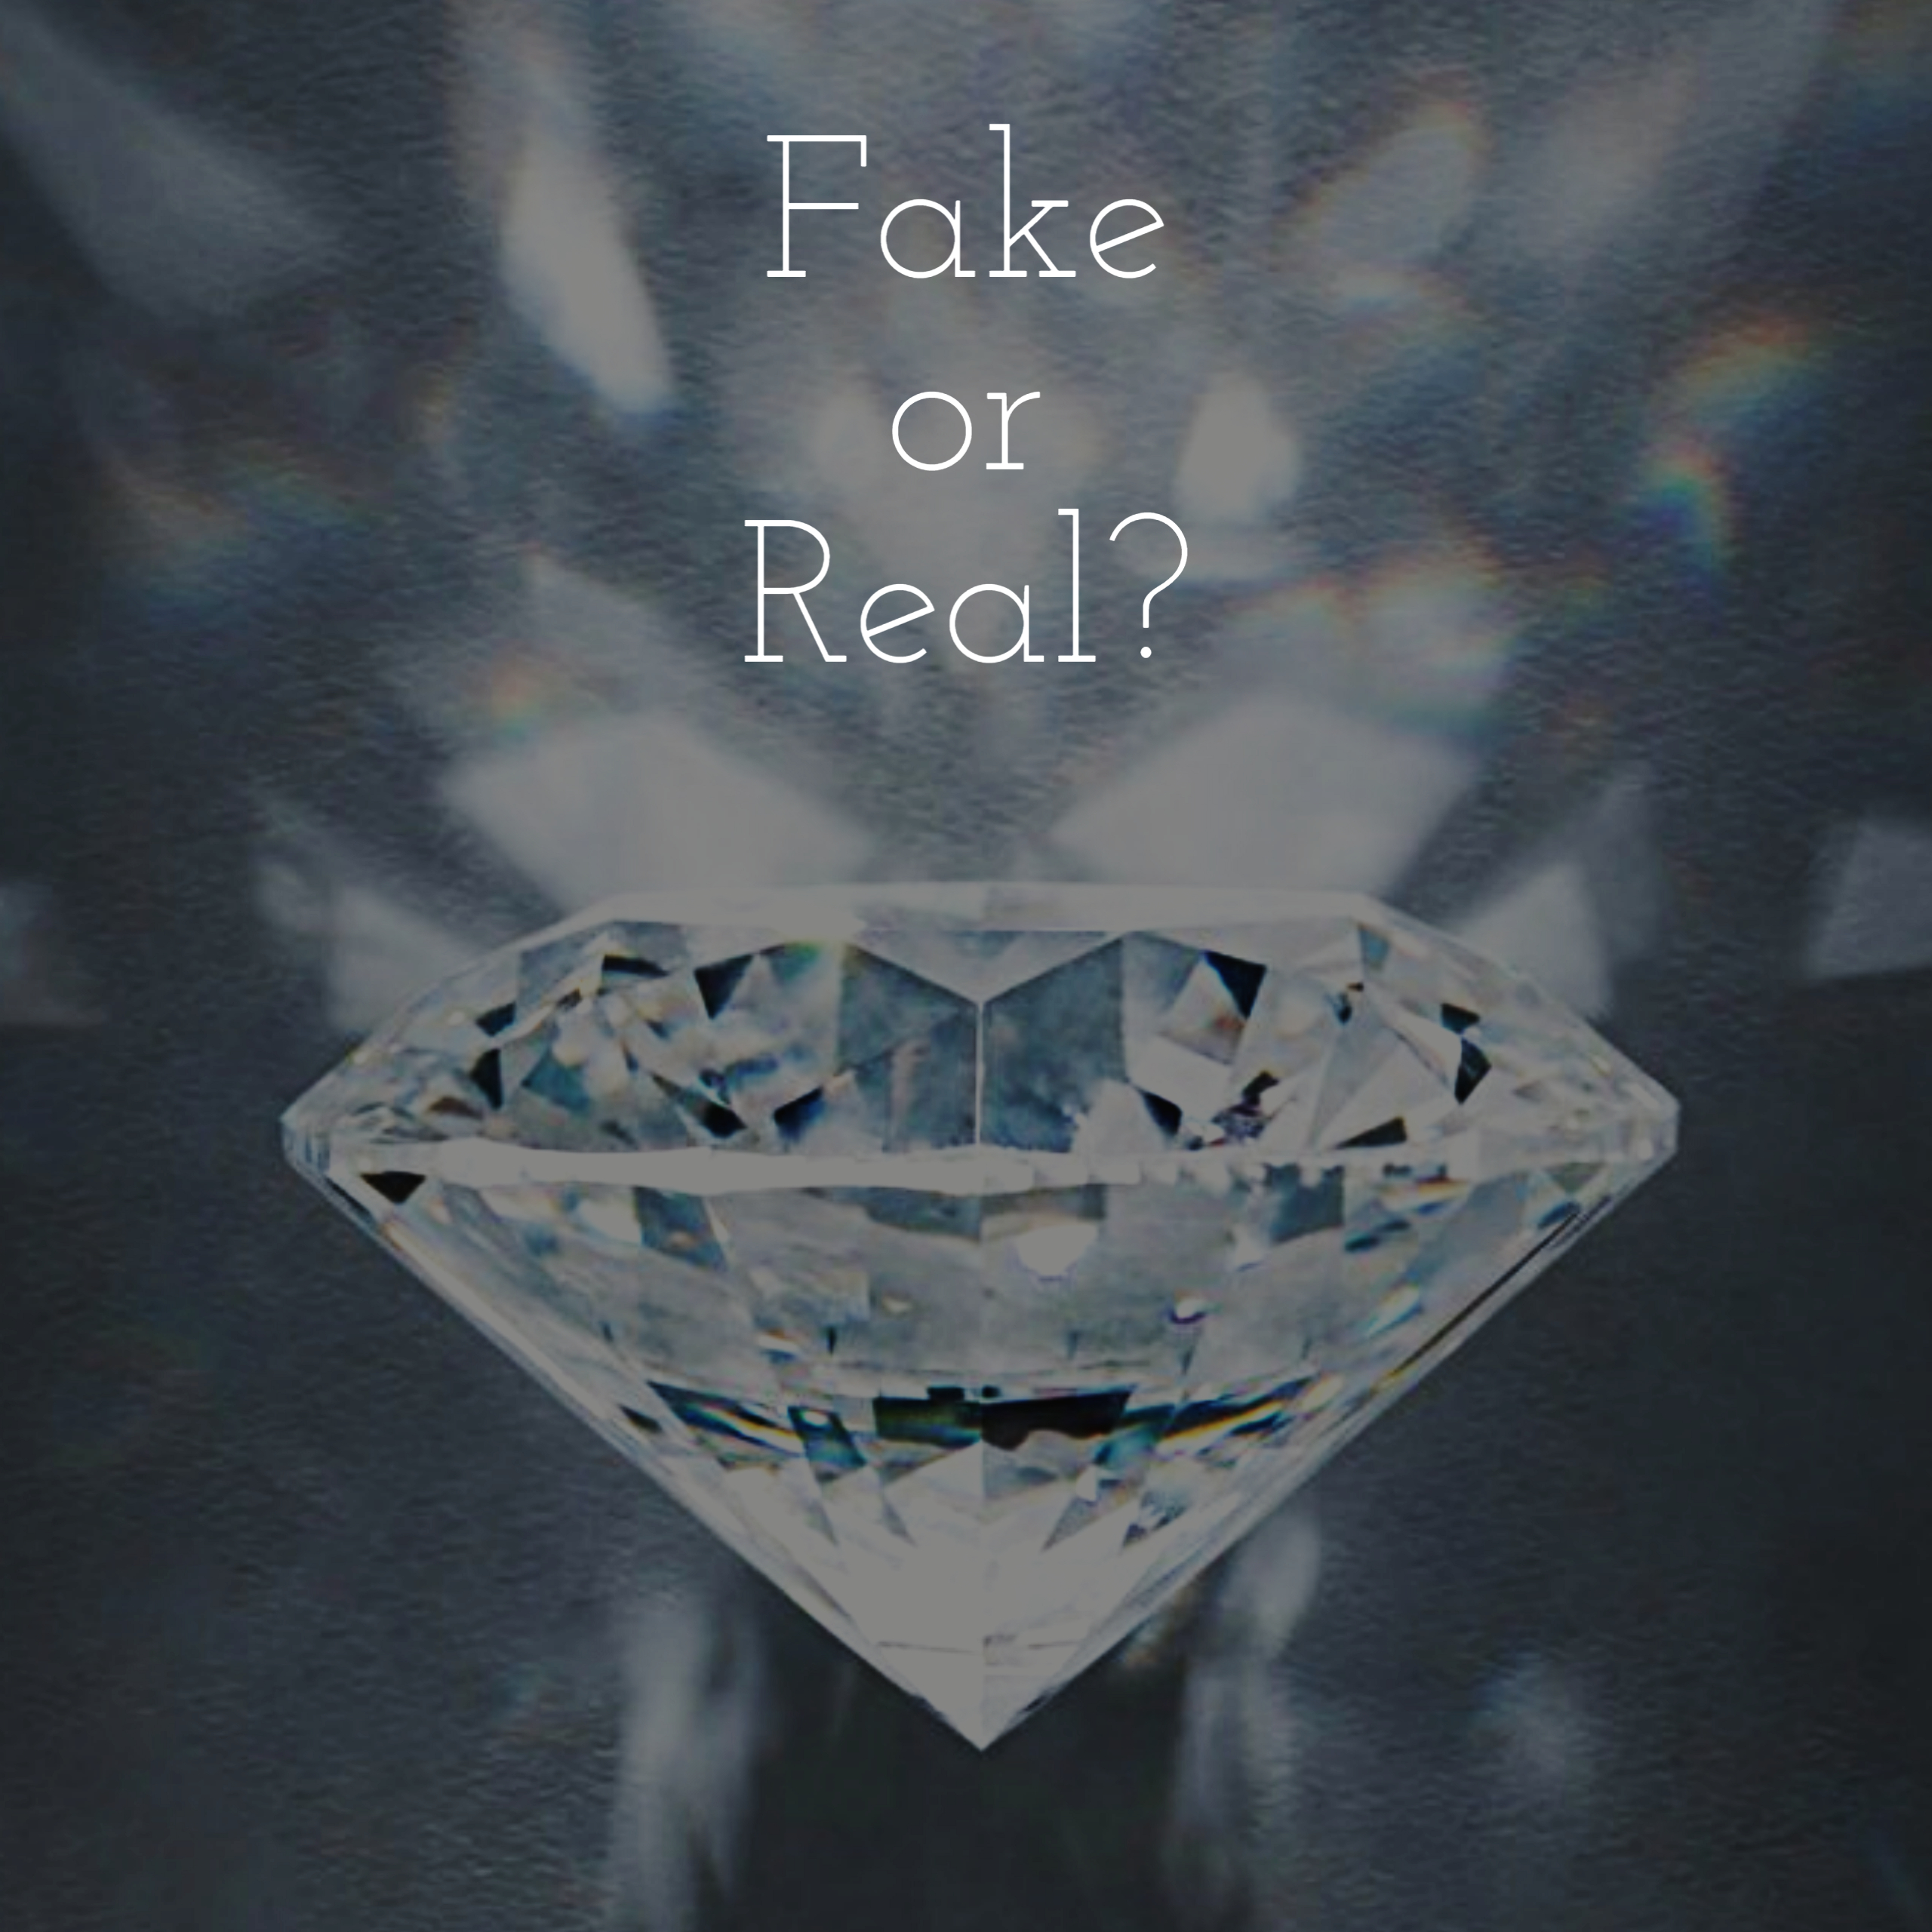 How Can You Tell if a Diamond is Real?